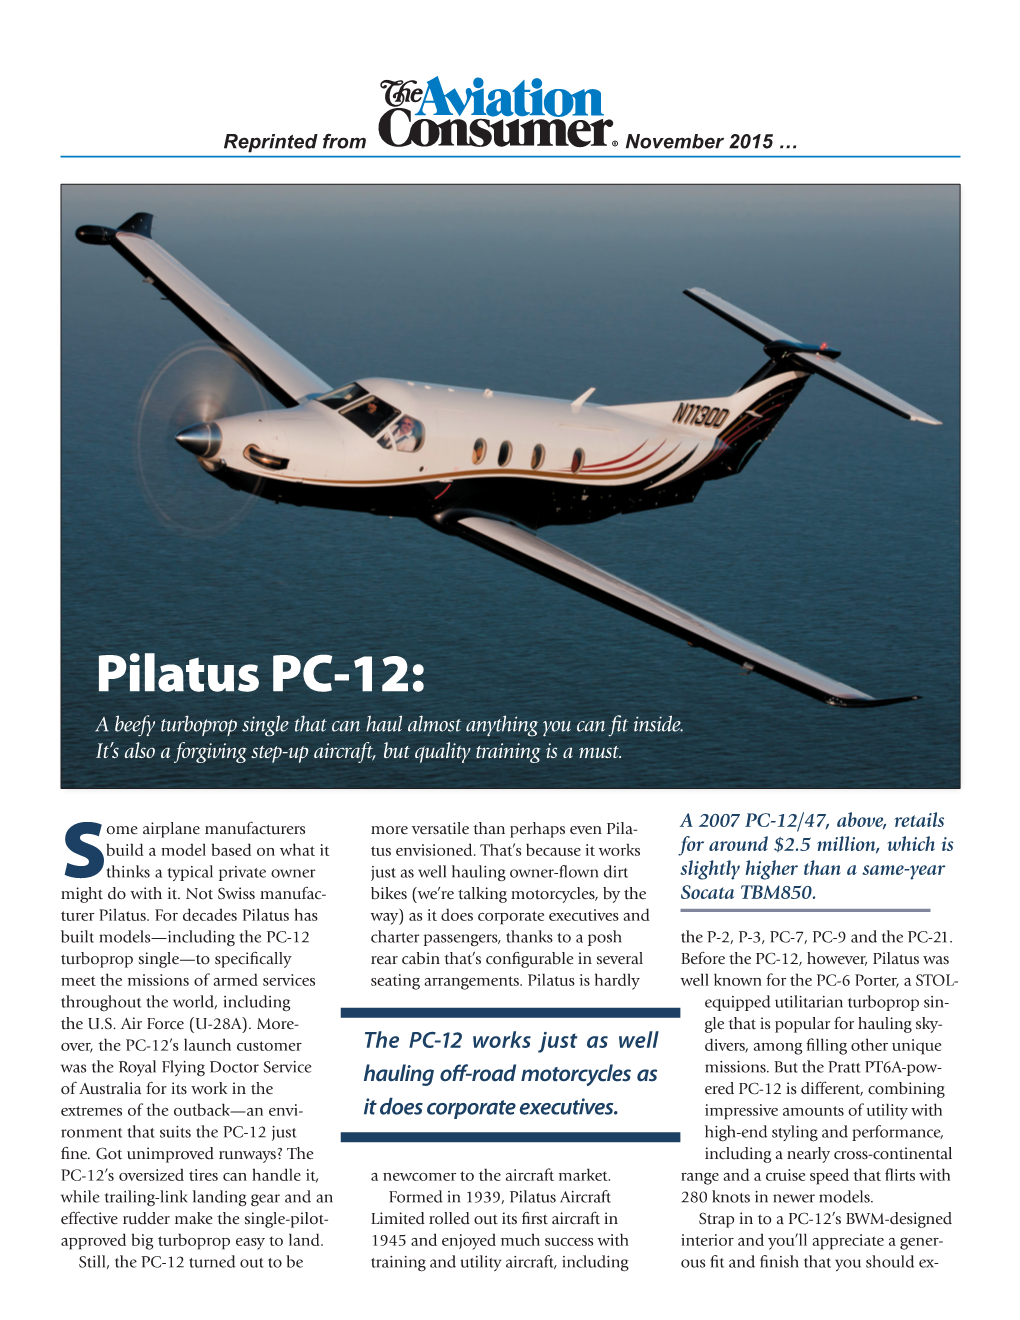 Pilatus PC-12: a Beefy Turboprop Single That Can Haul Almost Anything You Can Fit Inside